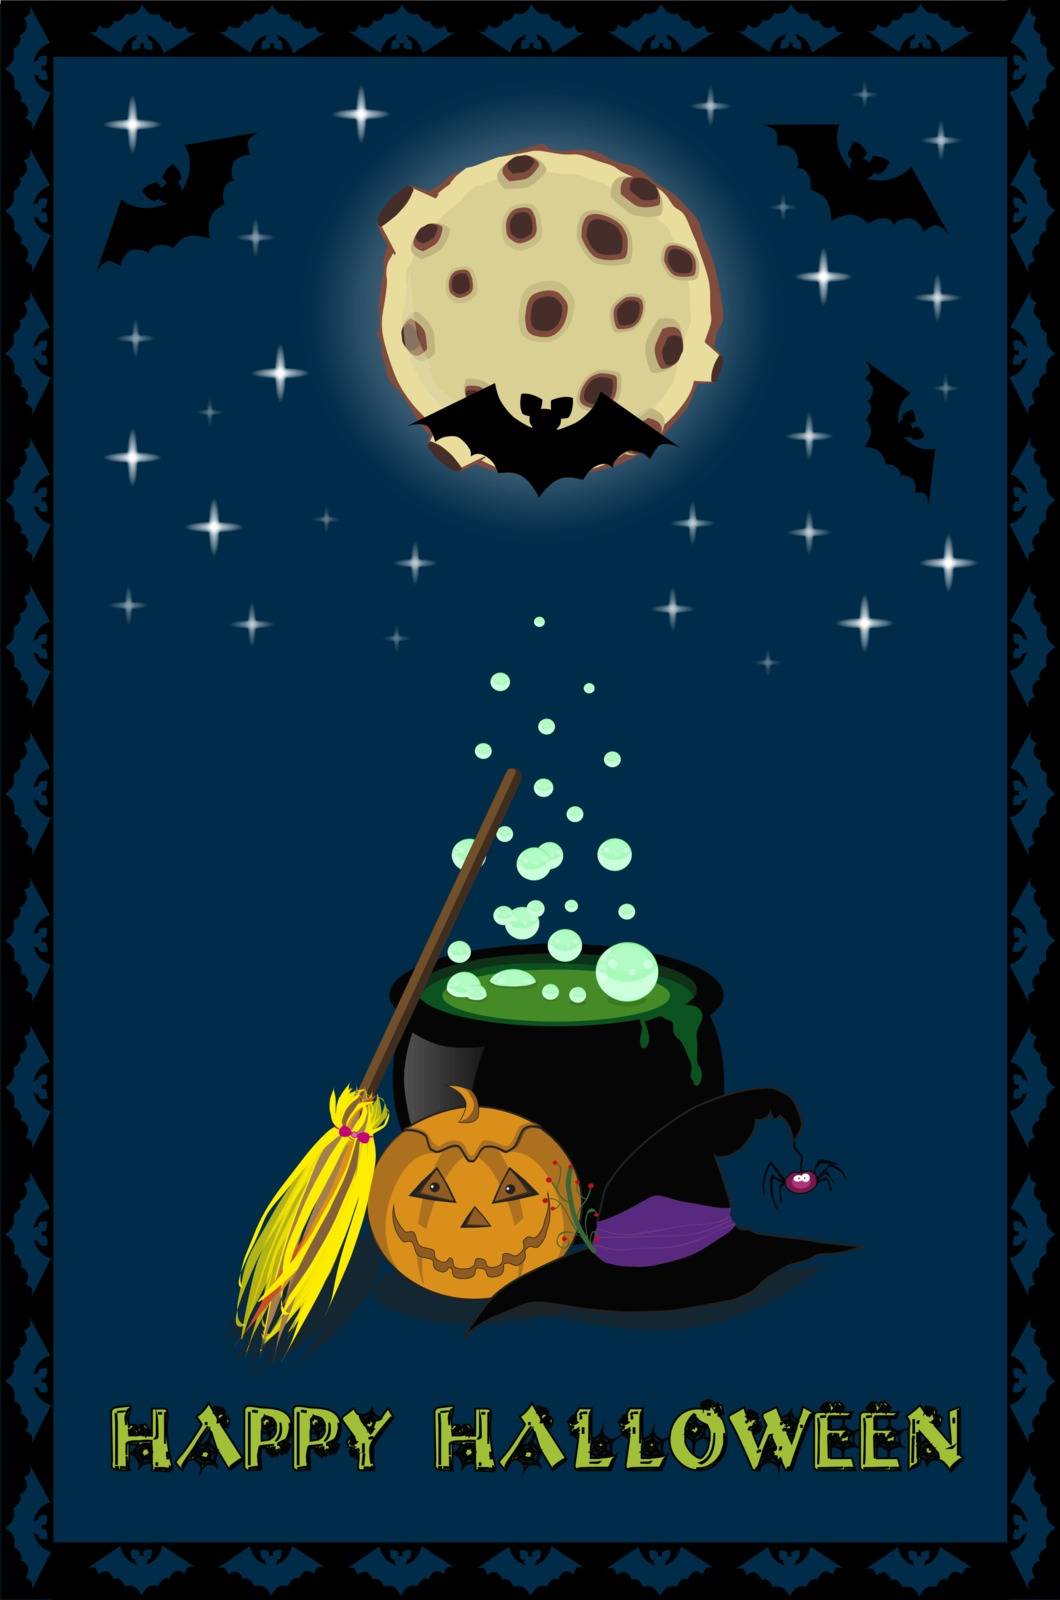 Happy Halloween card. Vector illustration of witch stuff on full moon background with stars and bats and green text Happy Halloween. Invitation, greeting card, poster, banner.